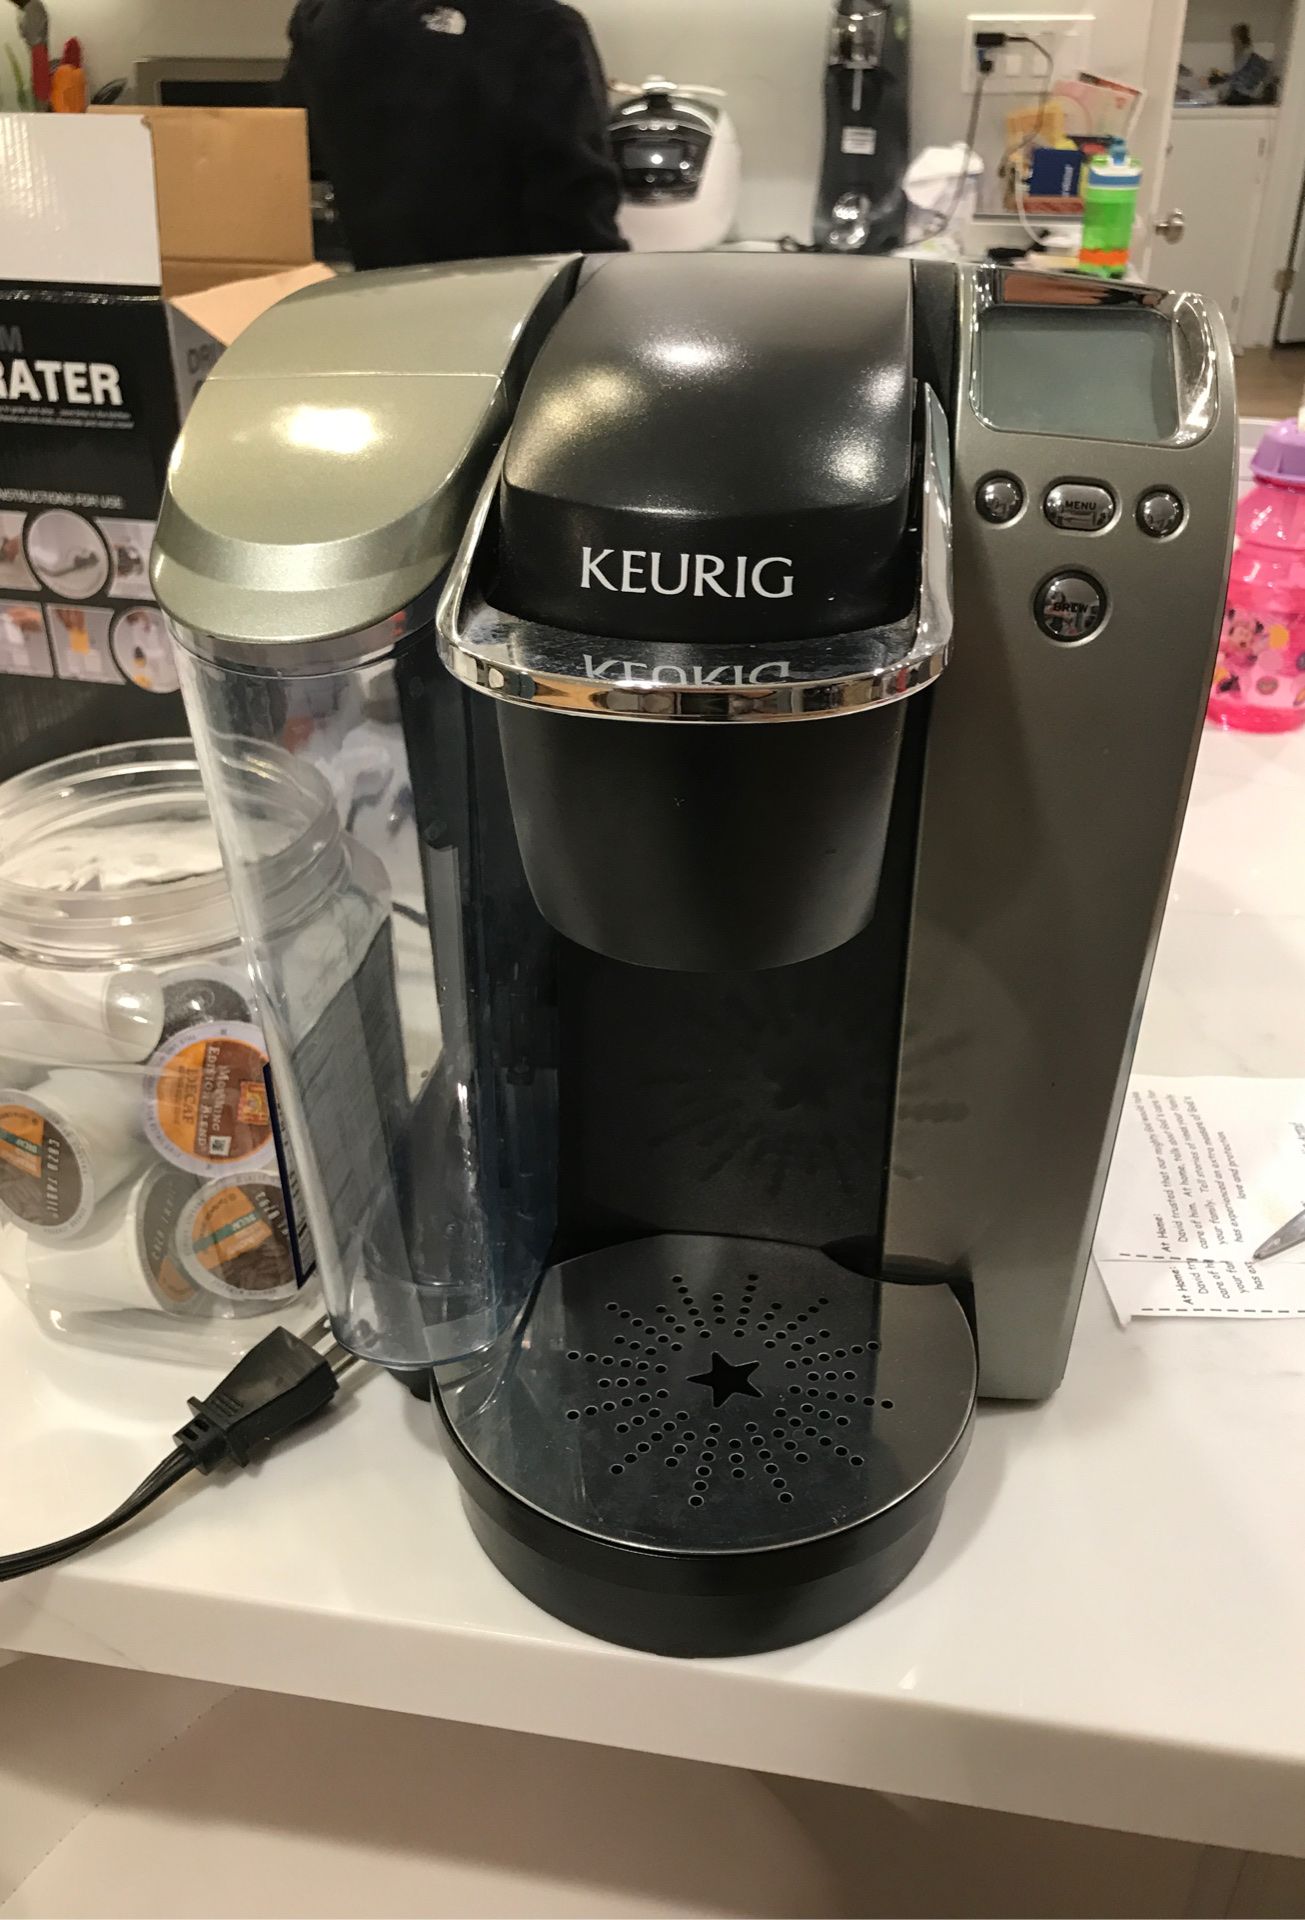 Keurig coffee maker with 9 pods